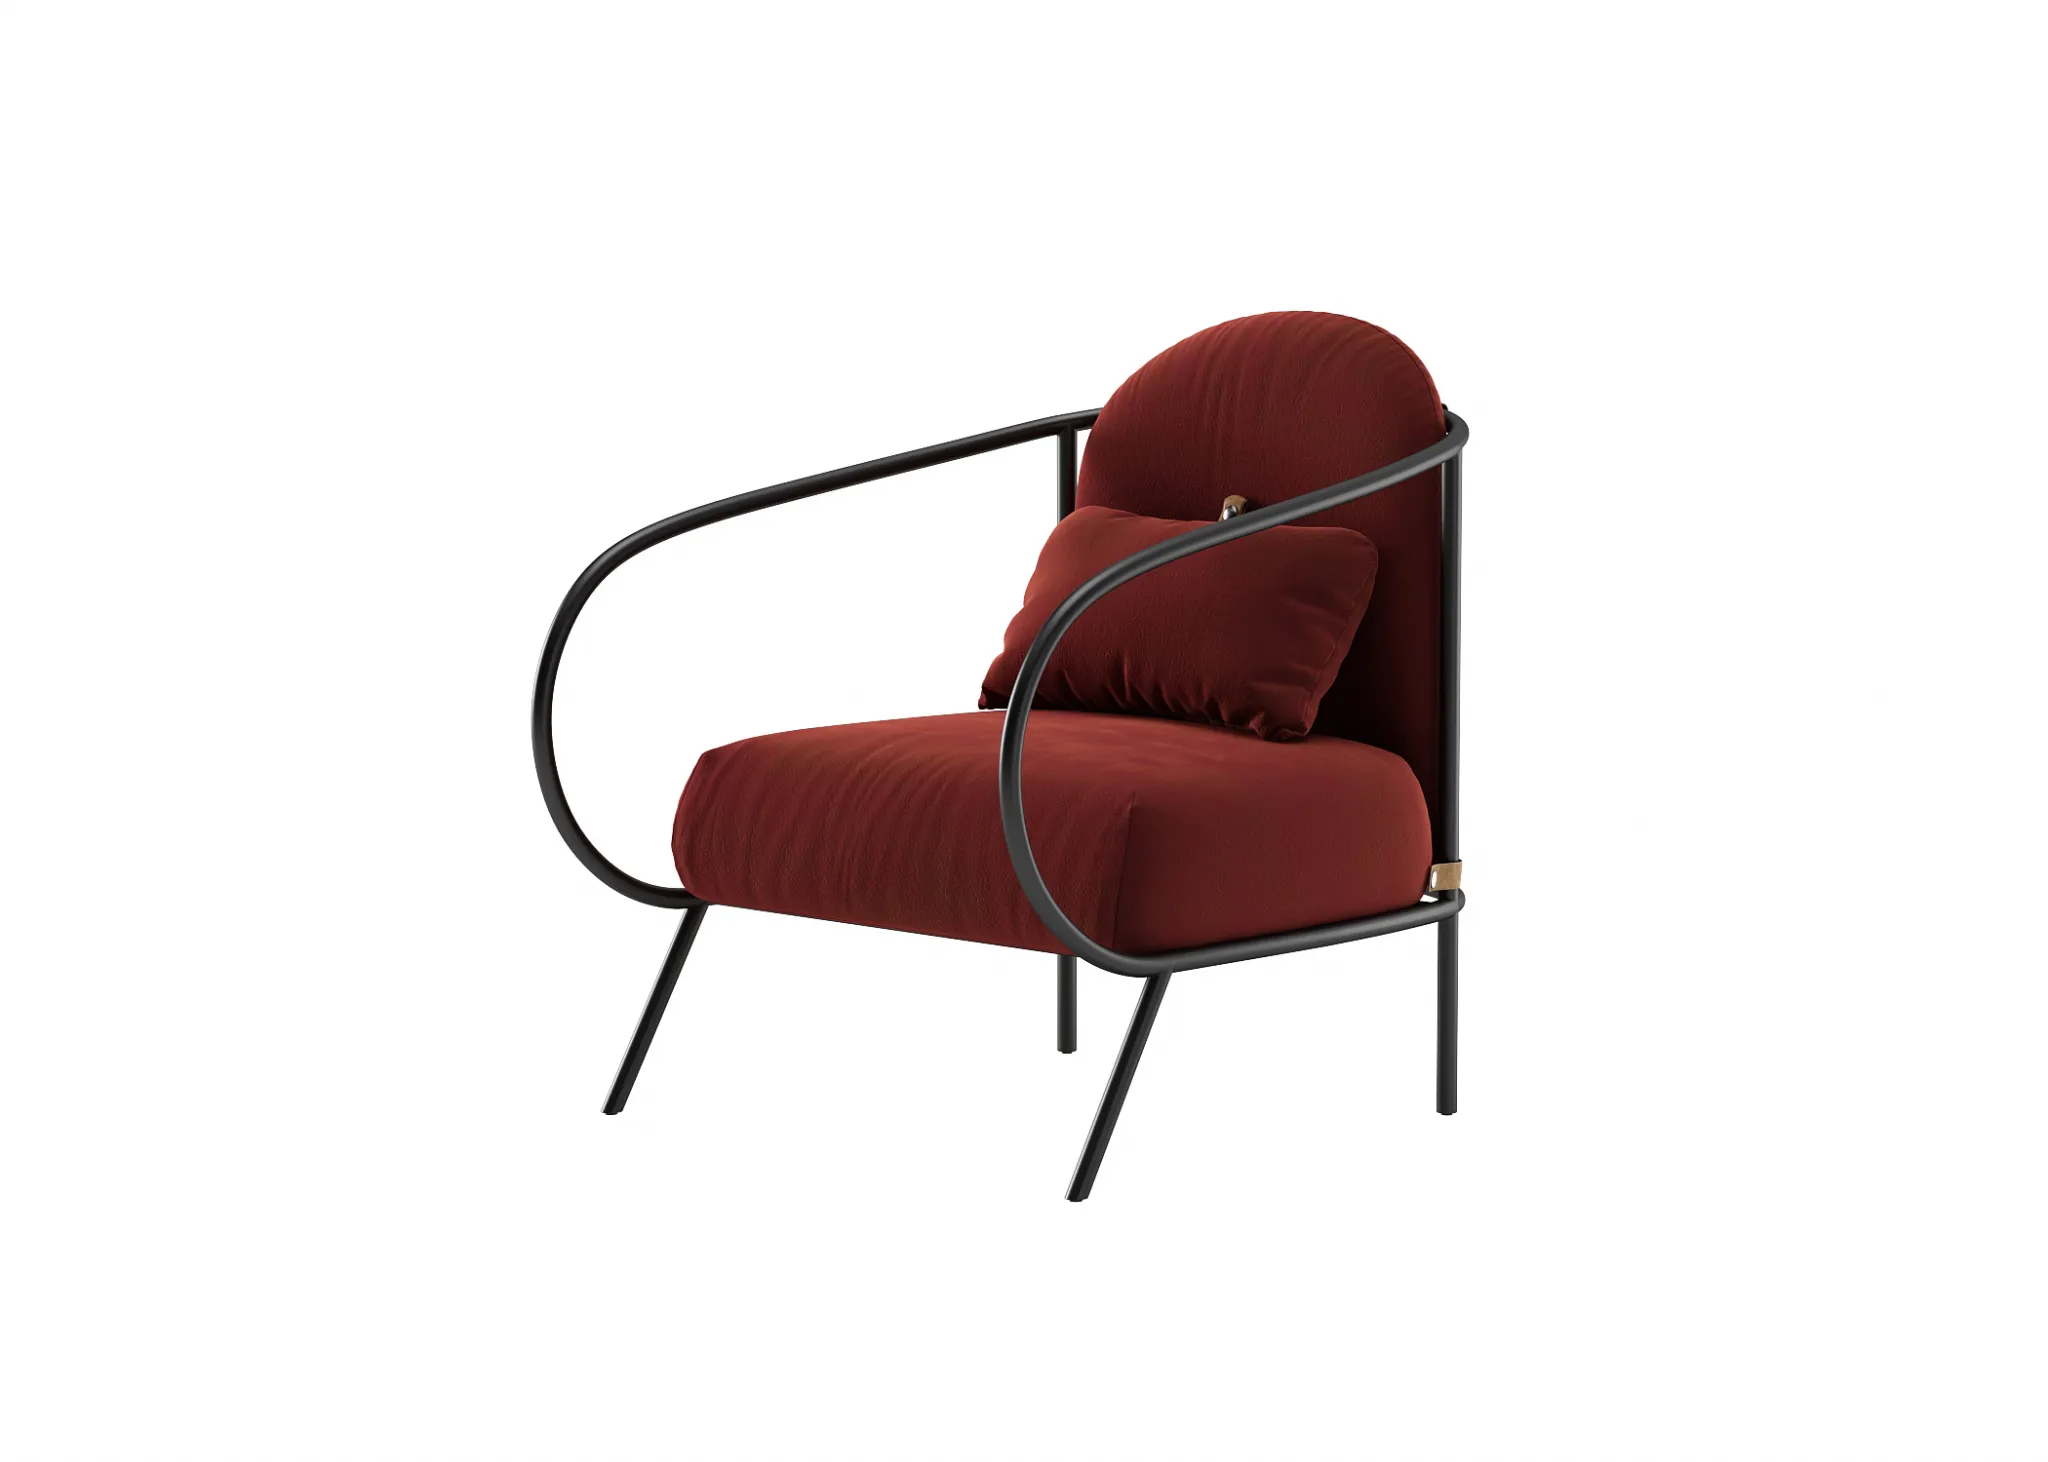 FURNITURE 3D MODELS – CHAIRS – 0015